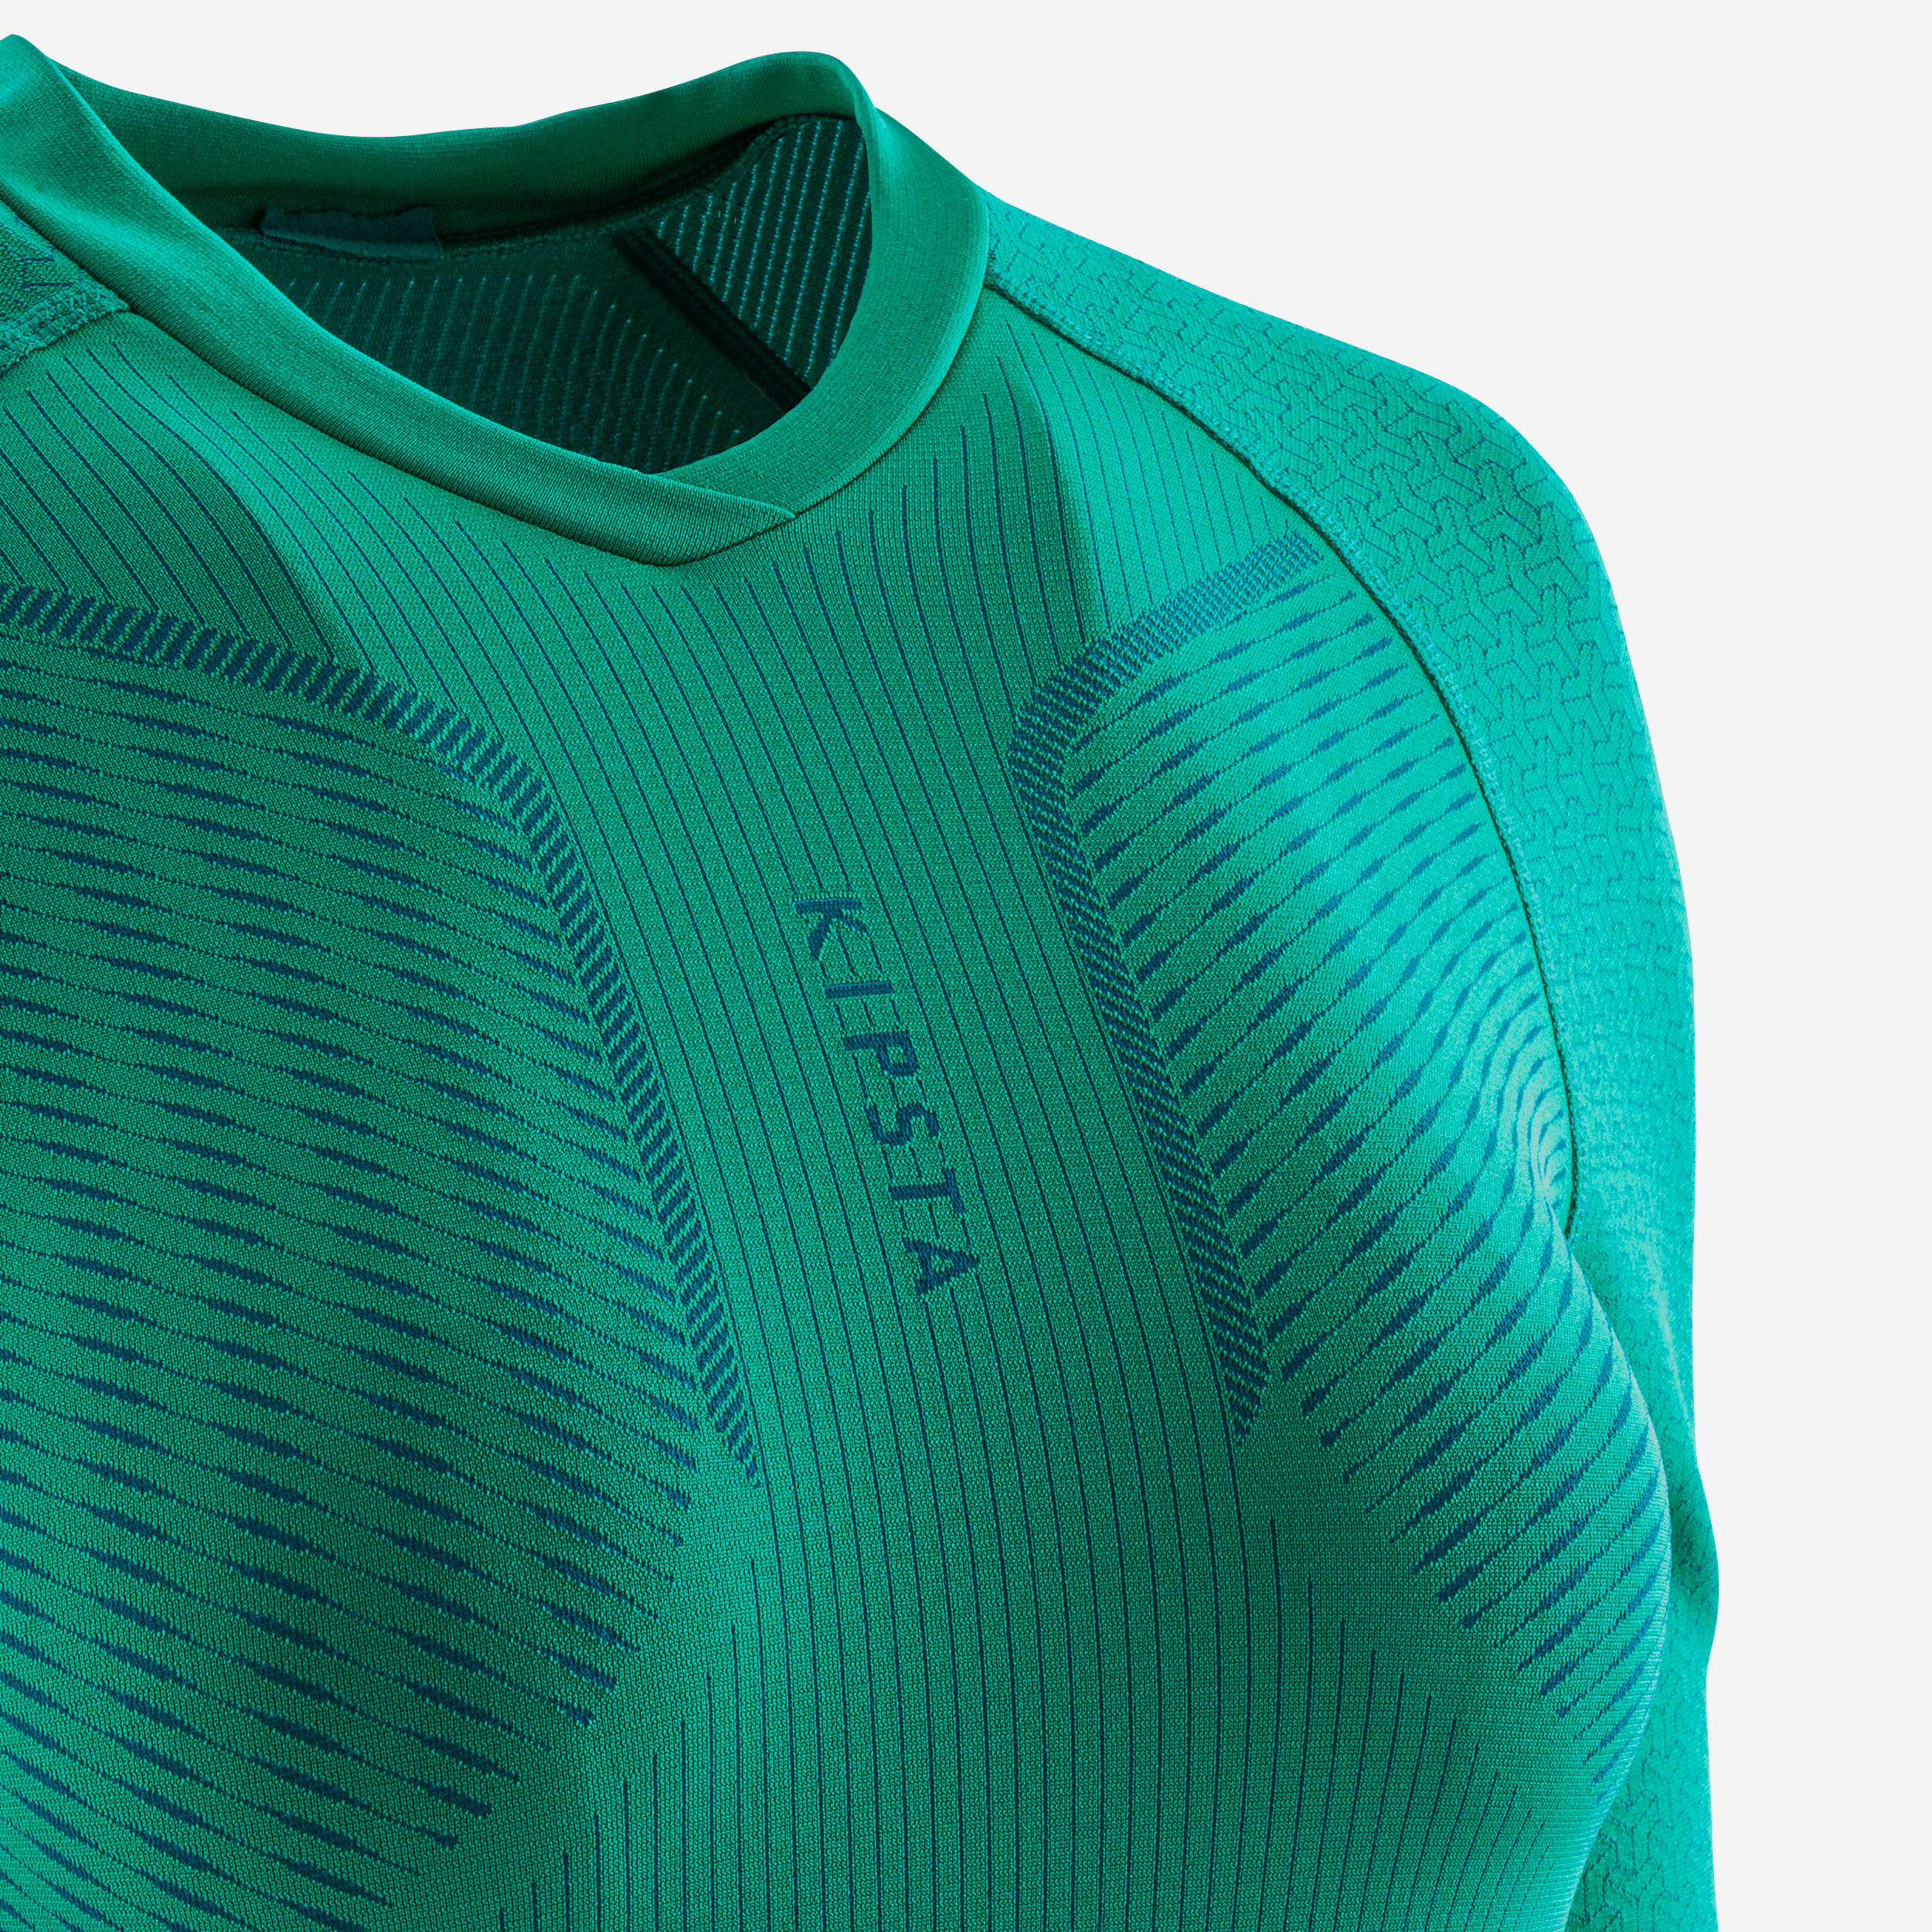 Adult Long-Sleeved Thermal Base Layer Top Keepdry 500 - Green 12/14